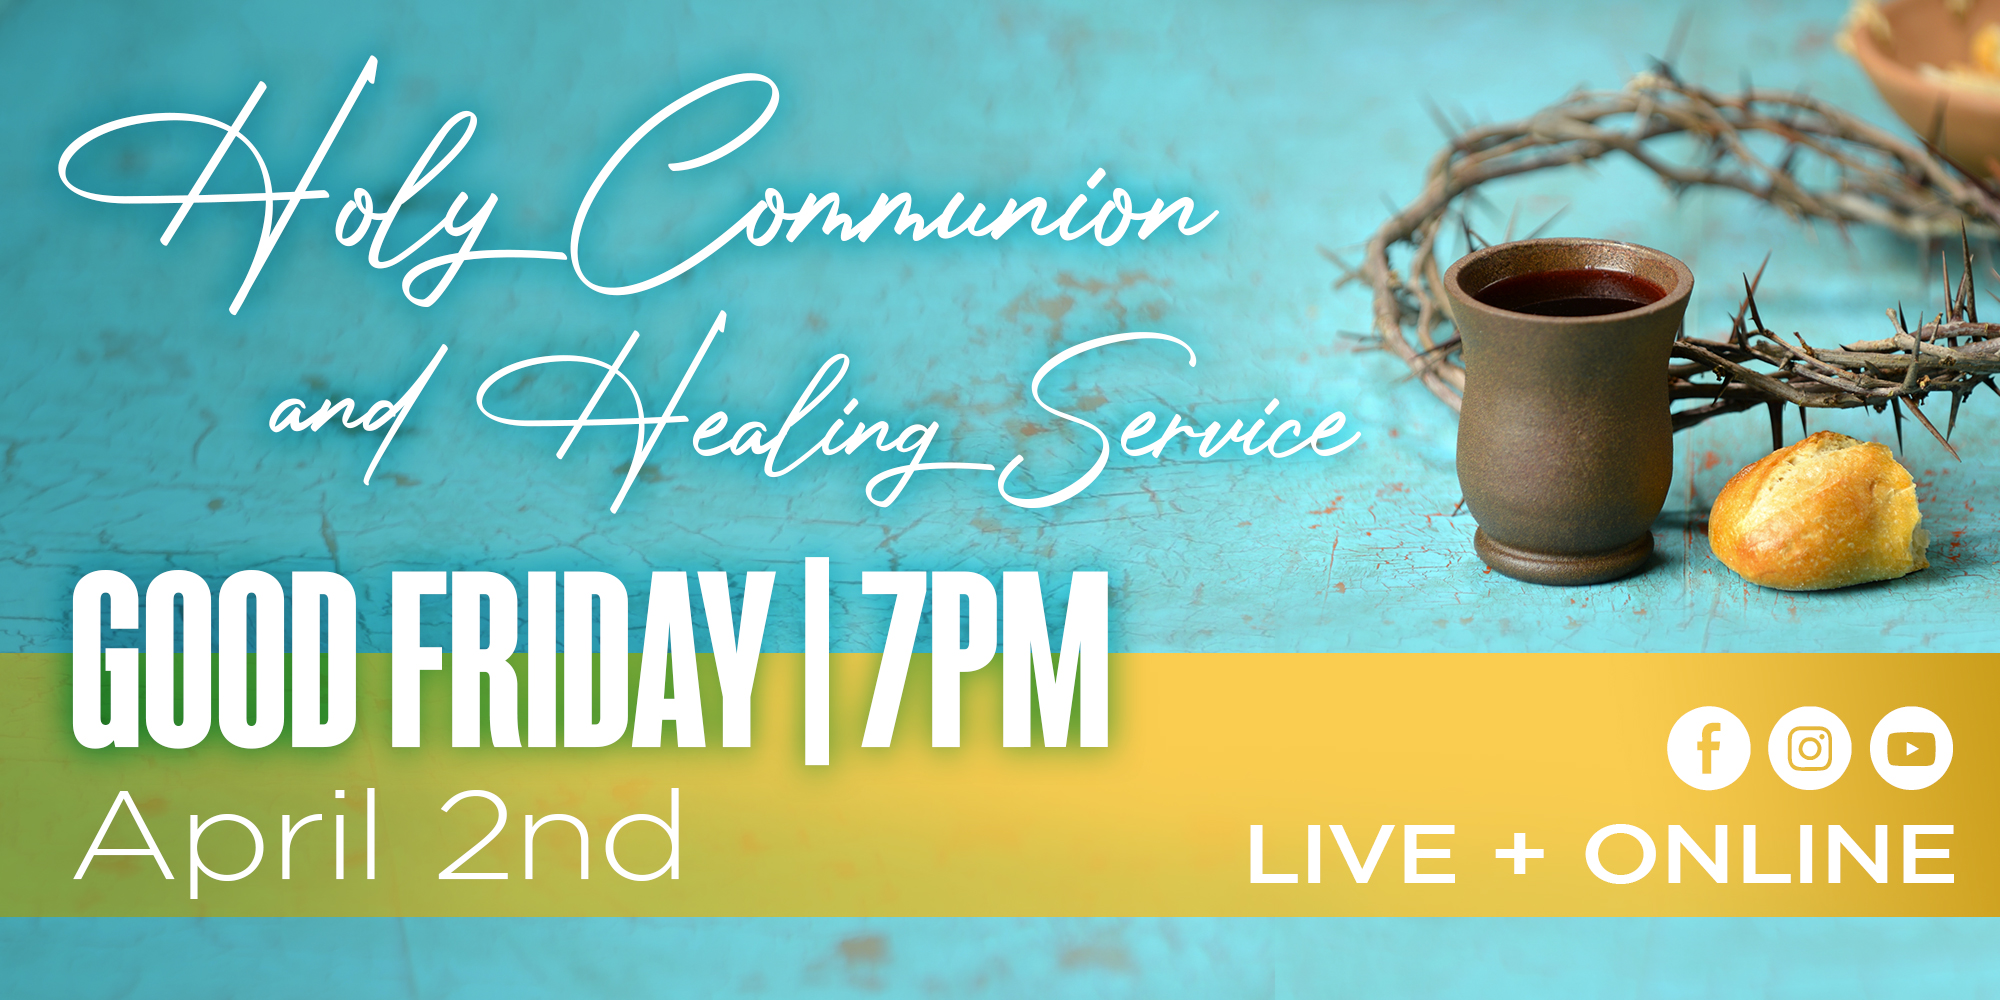 Holy Communion and Healing Service Good Friday 7PM April 2nd Live and Online